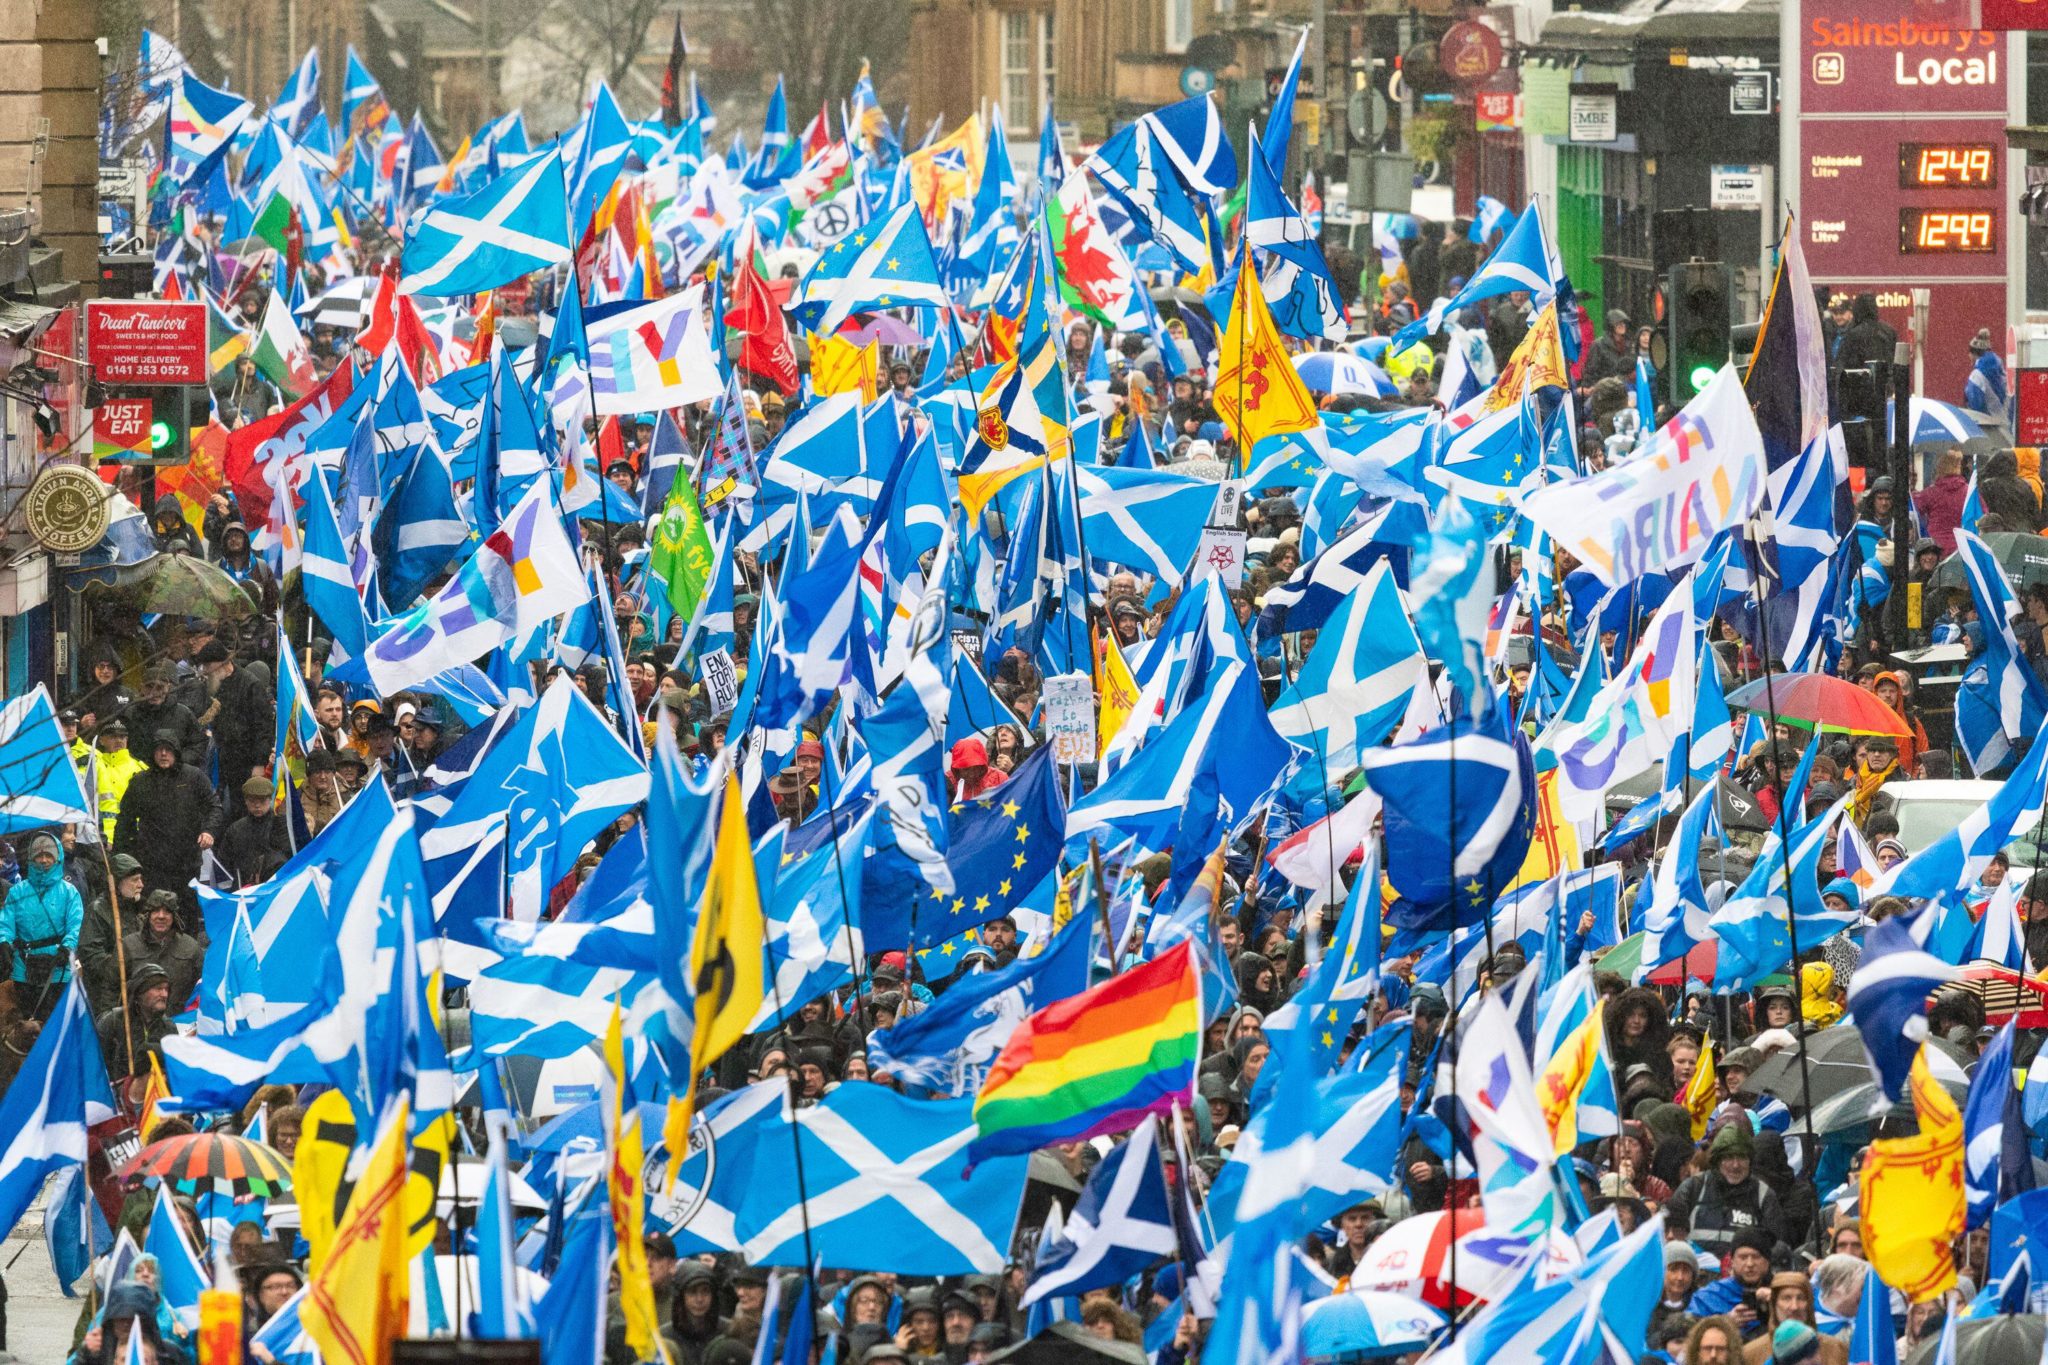 Scottish independence supporters marching through the streets of Glasgow, Scotland in January 2020.